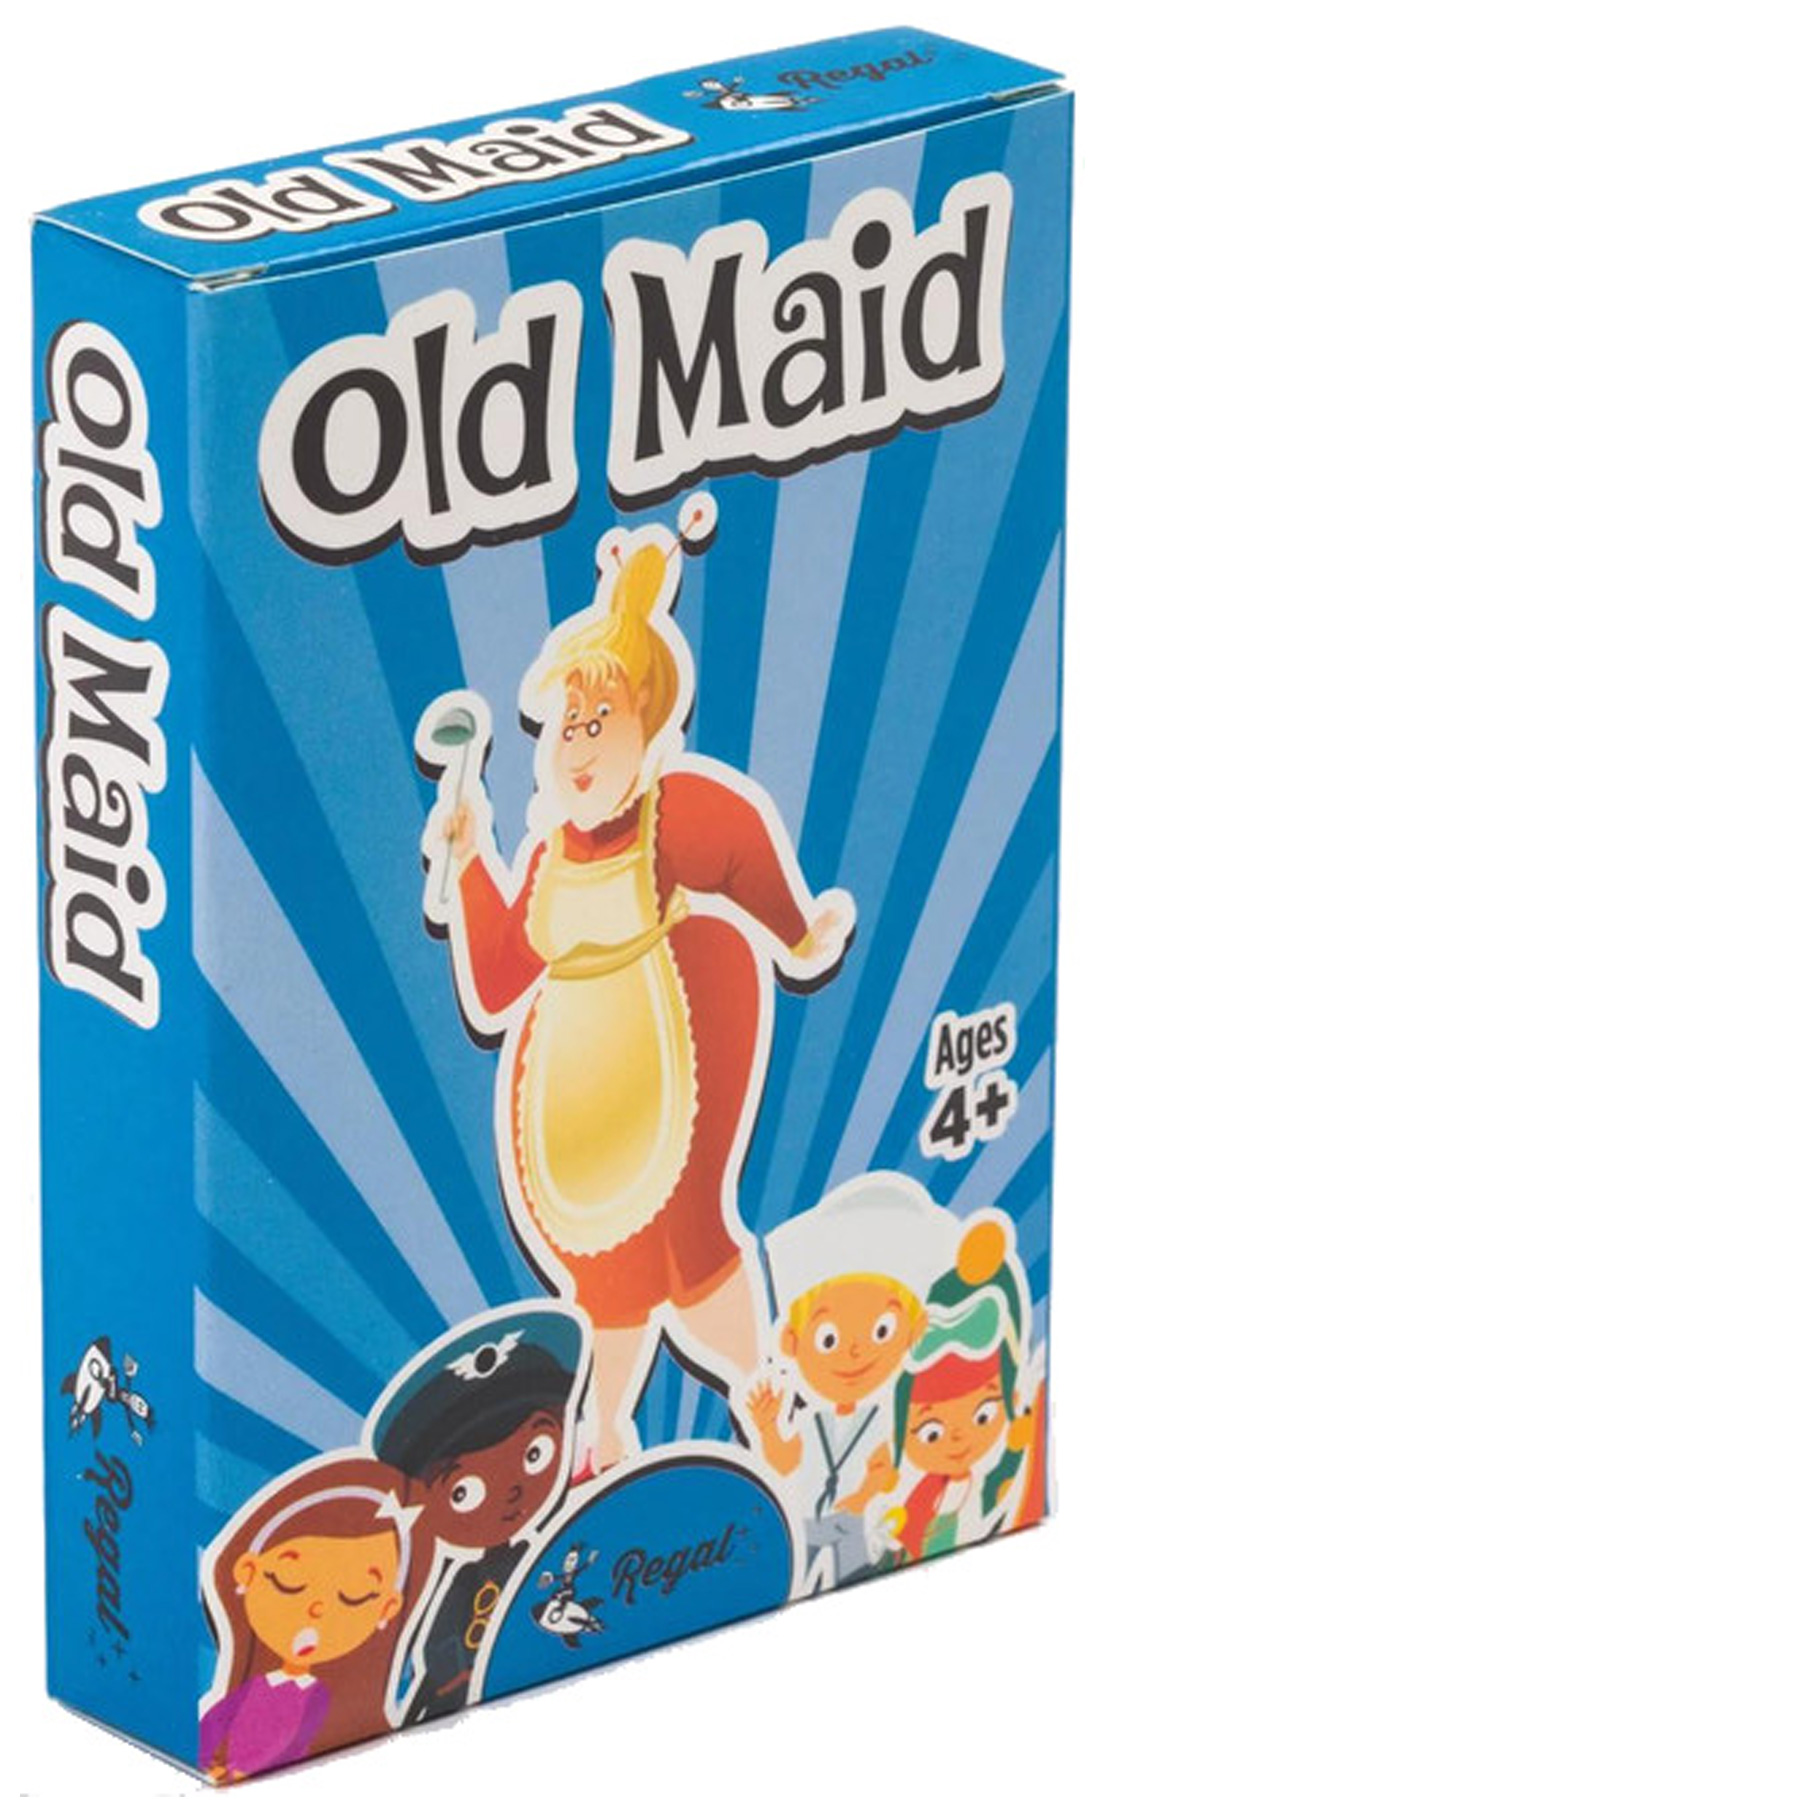 OLD MAID CLASSIC CARD GAME